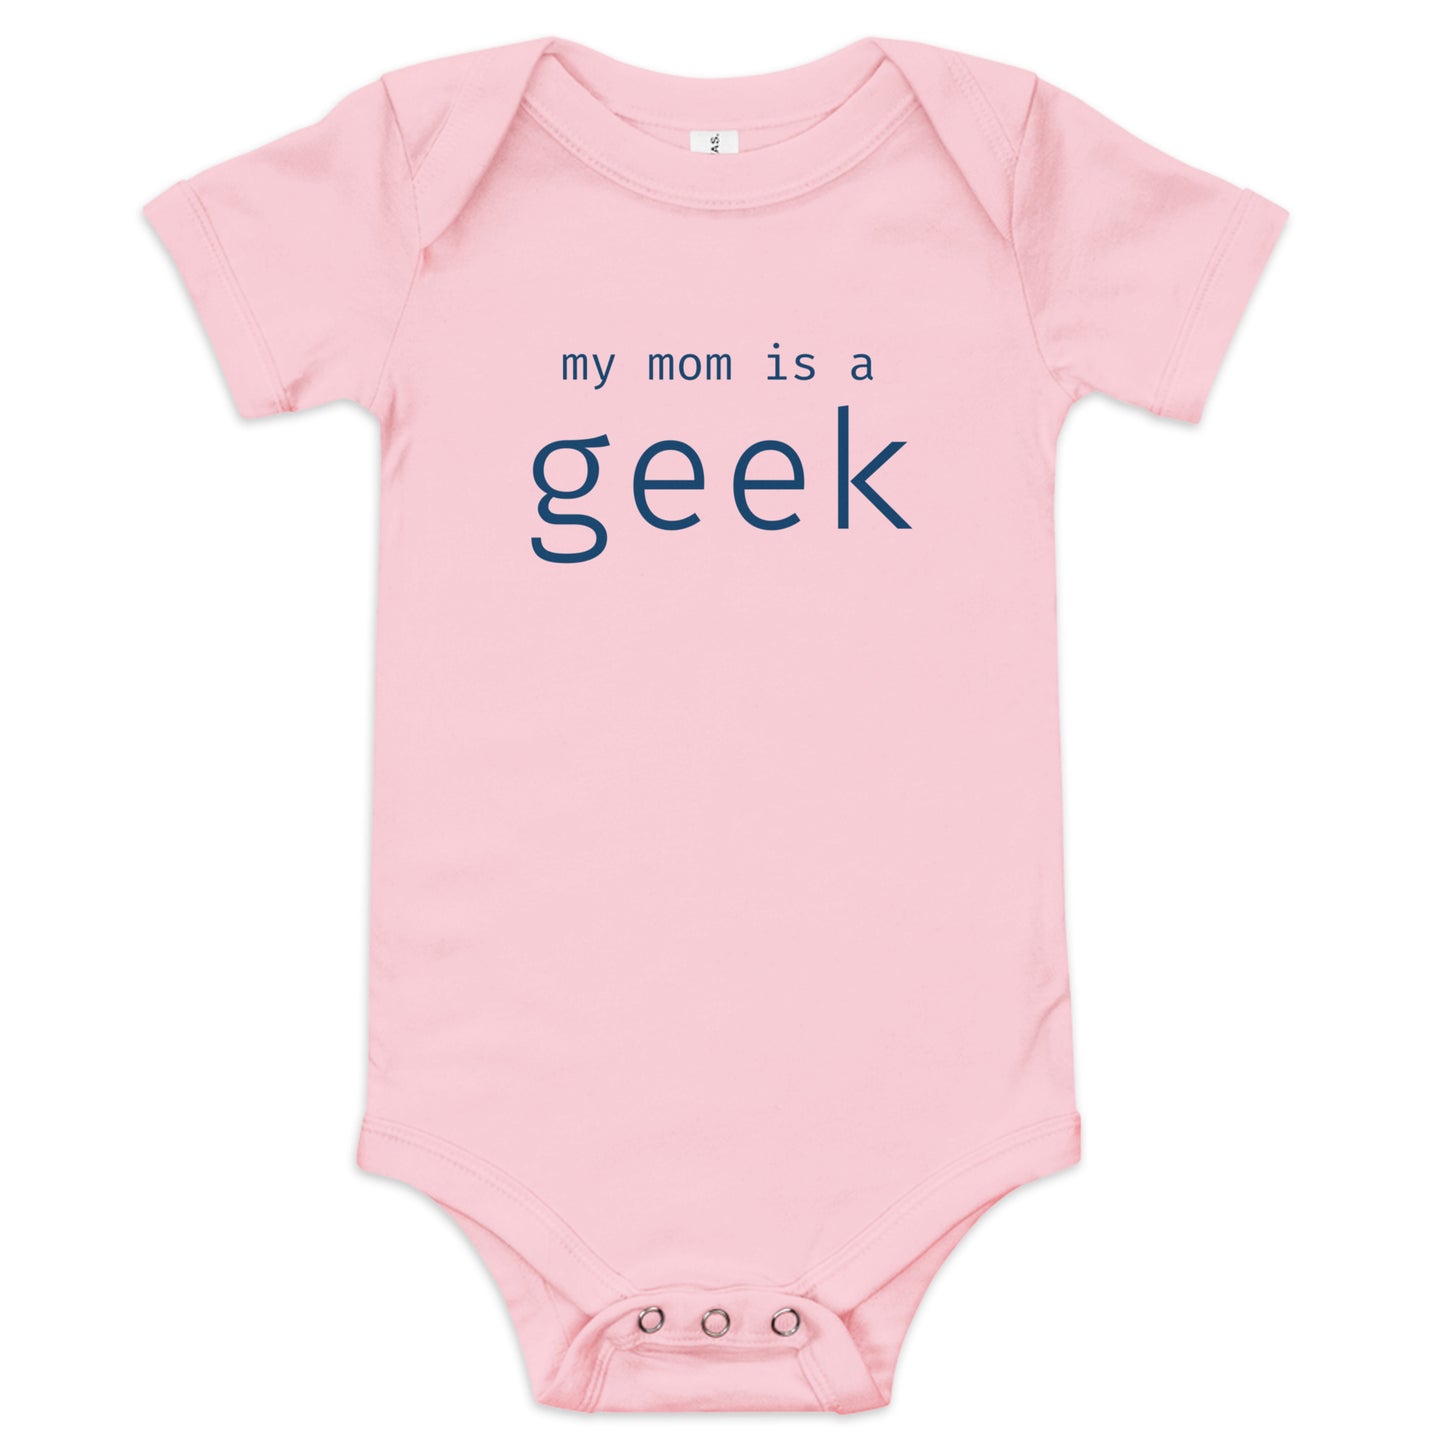 My mom is a geek - Blue Text - Baby short sleeve one piece